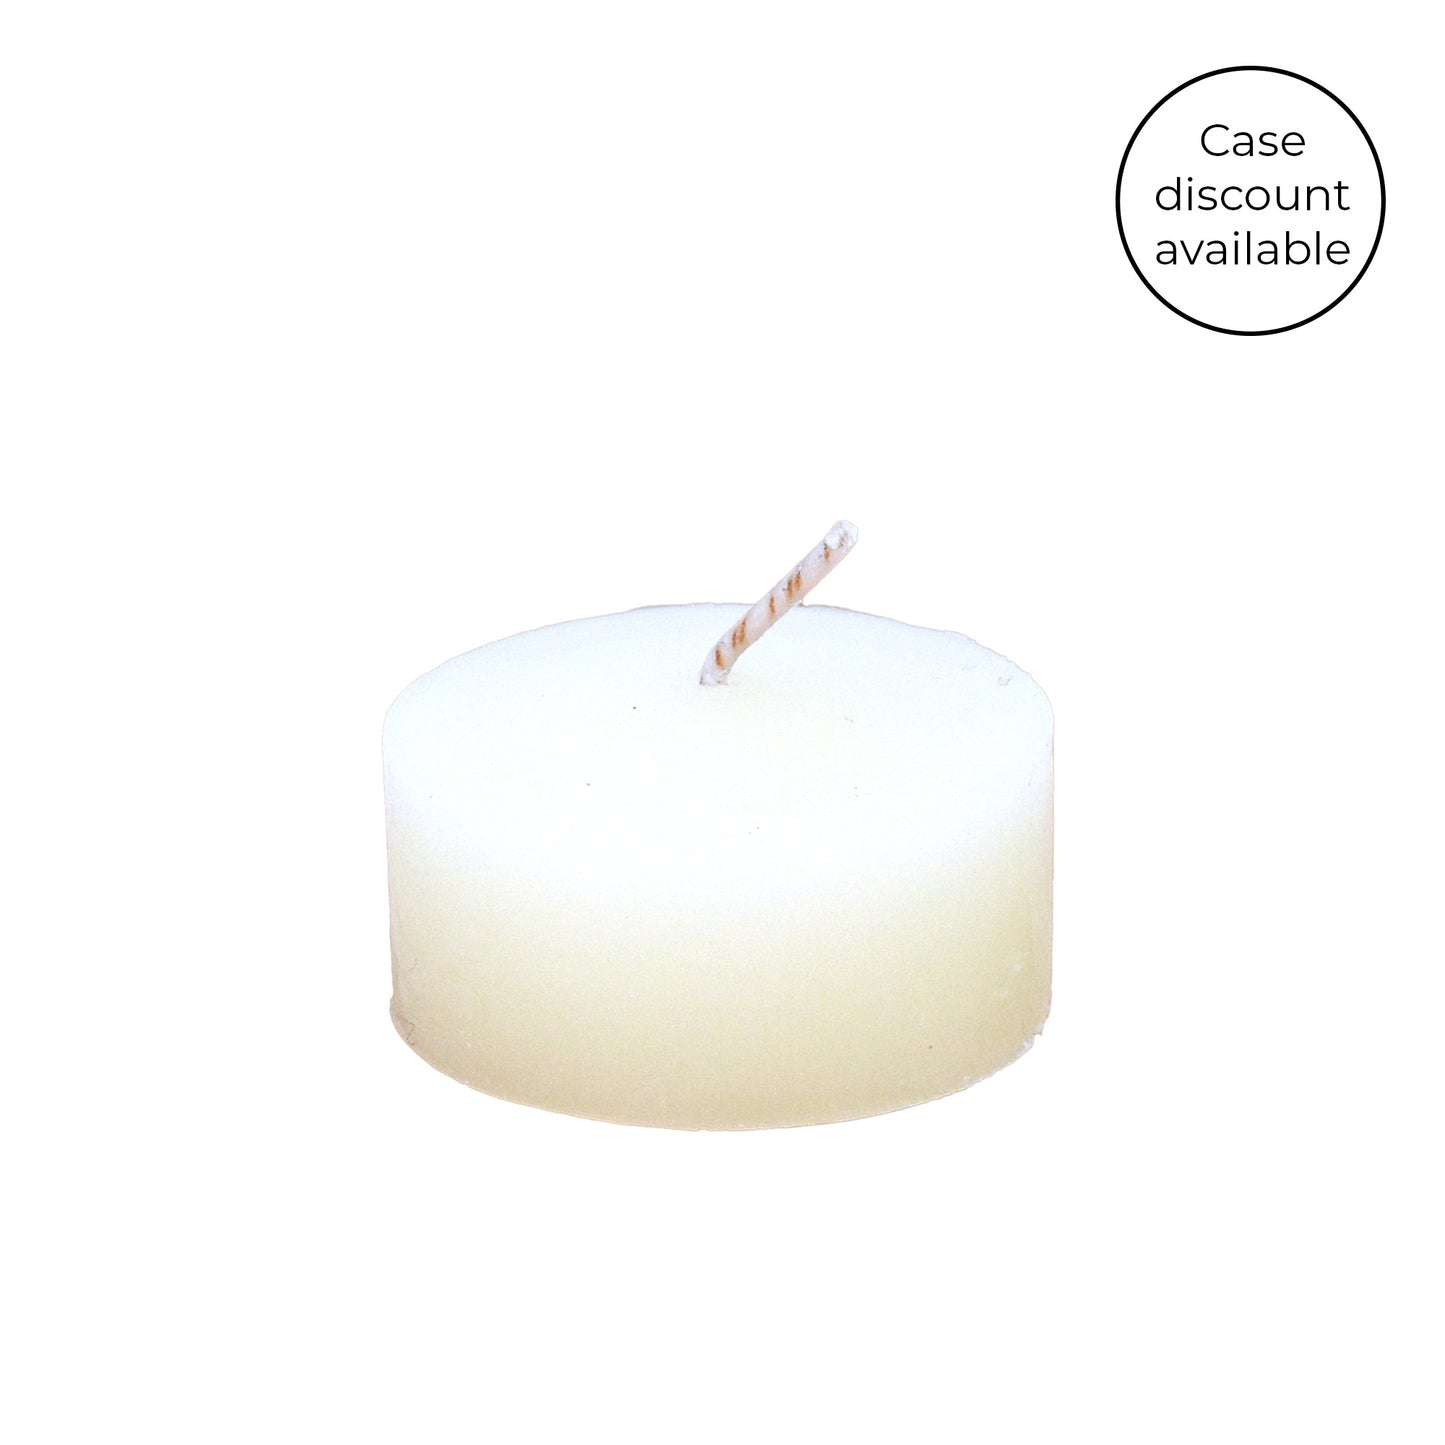 Pearl Beeswax Tealight Candle - Refill